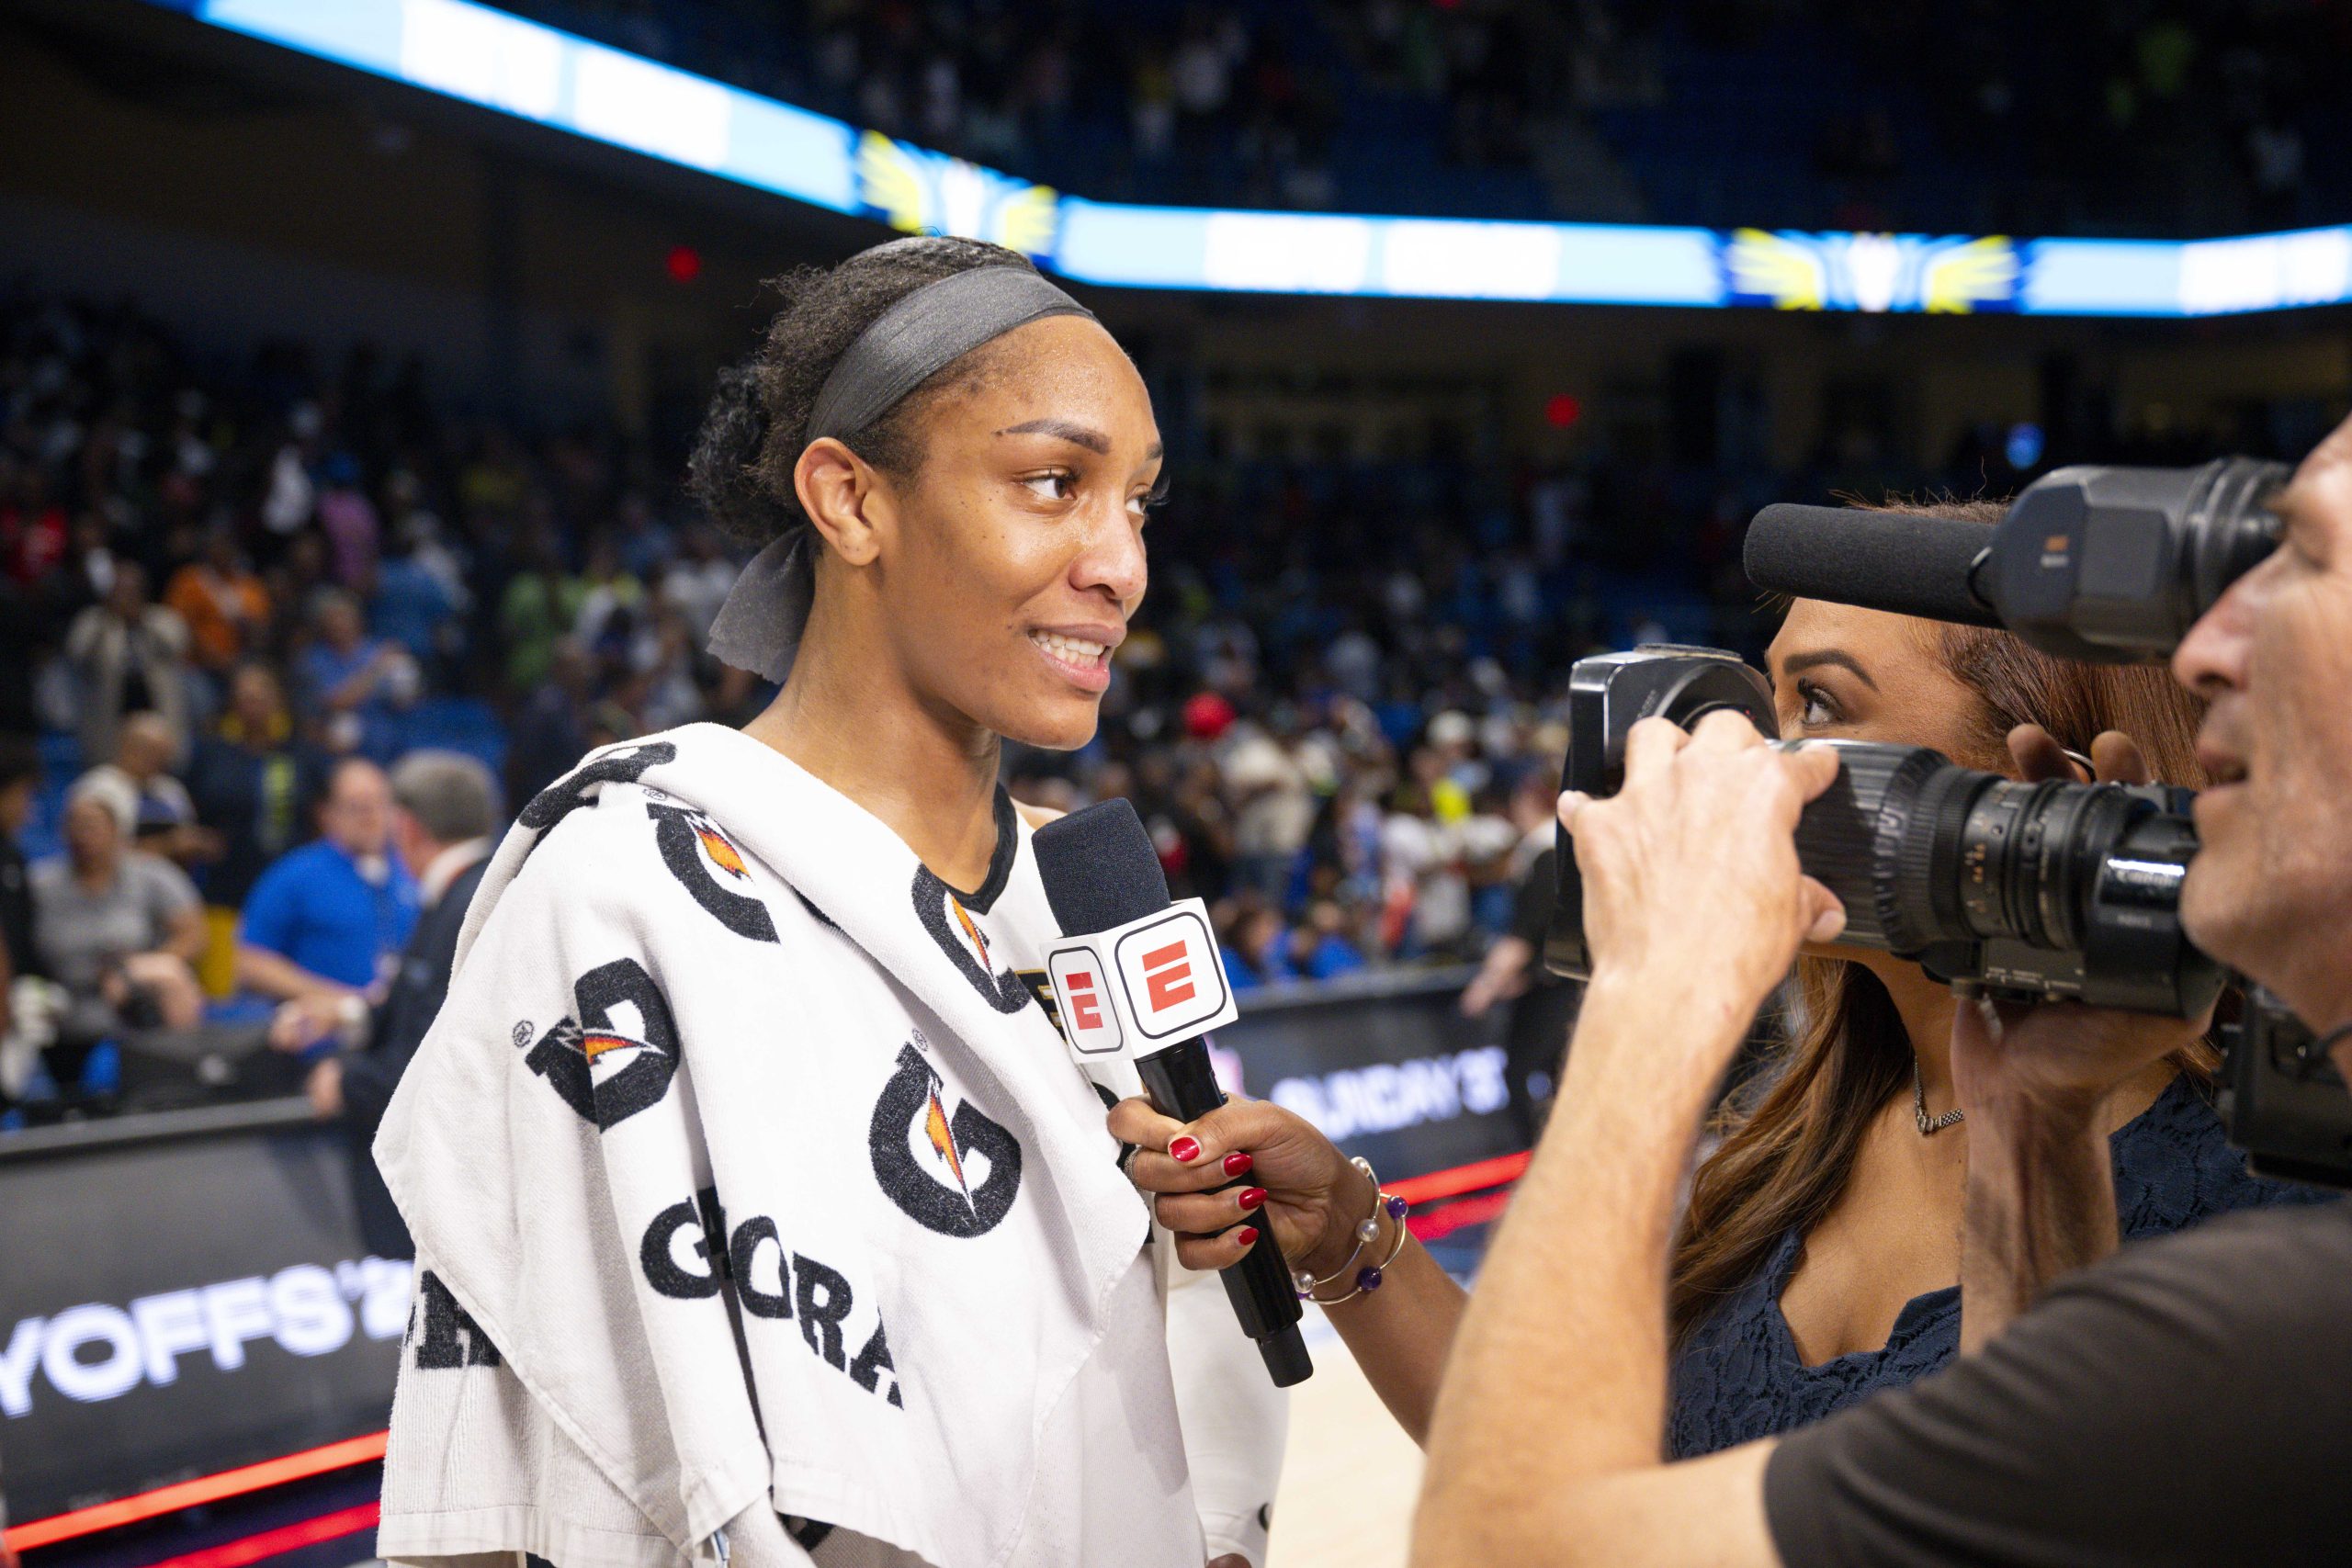 It’s time for Nike and others to catch up with A’ja Wilson’s true starpower